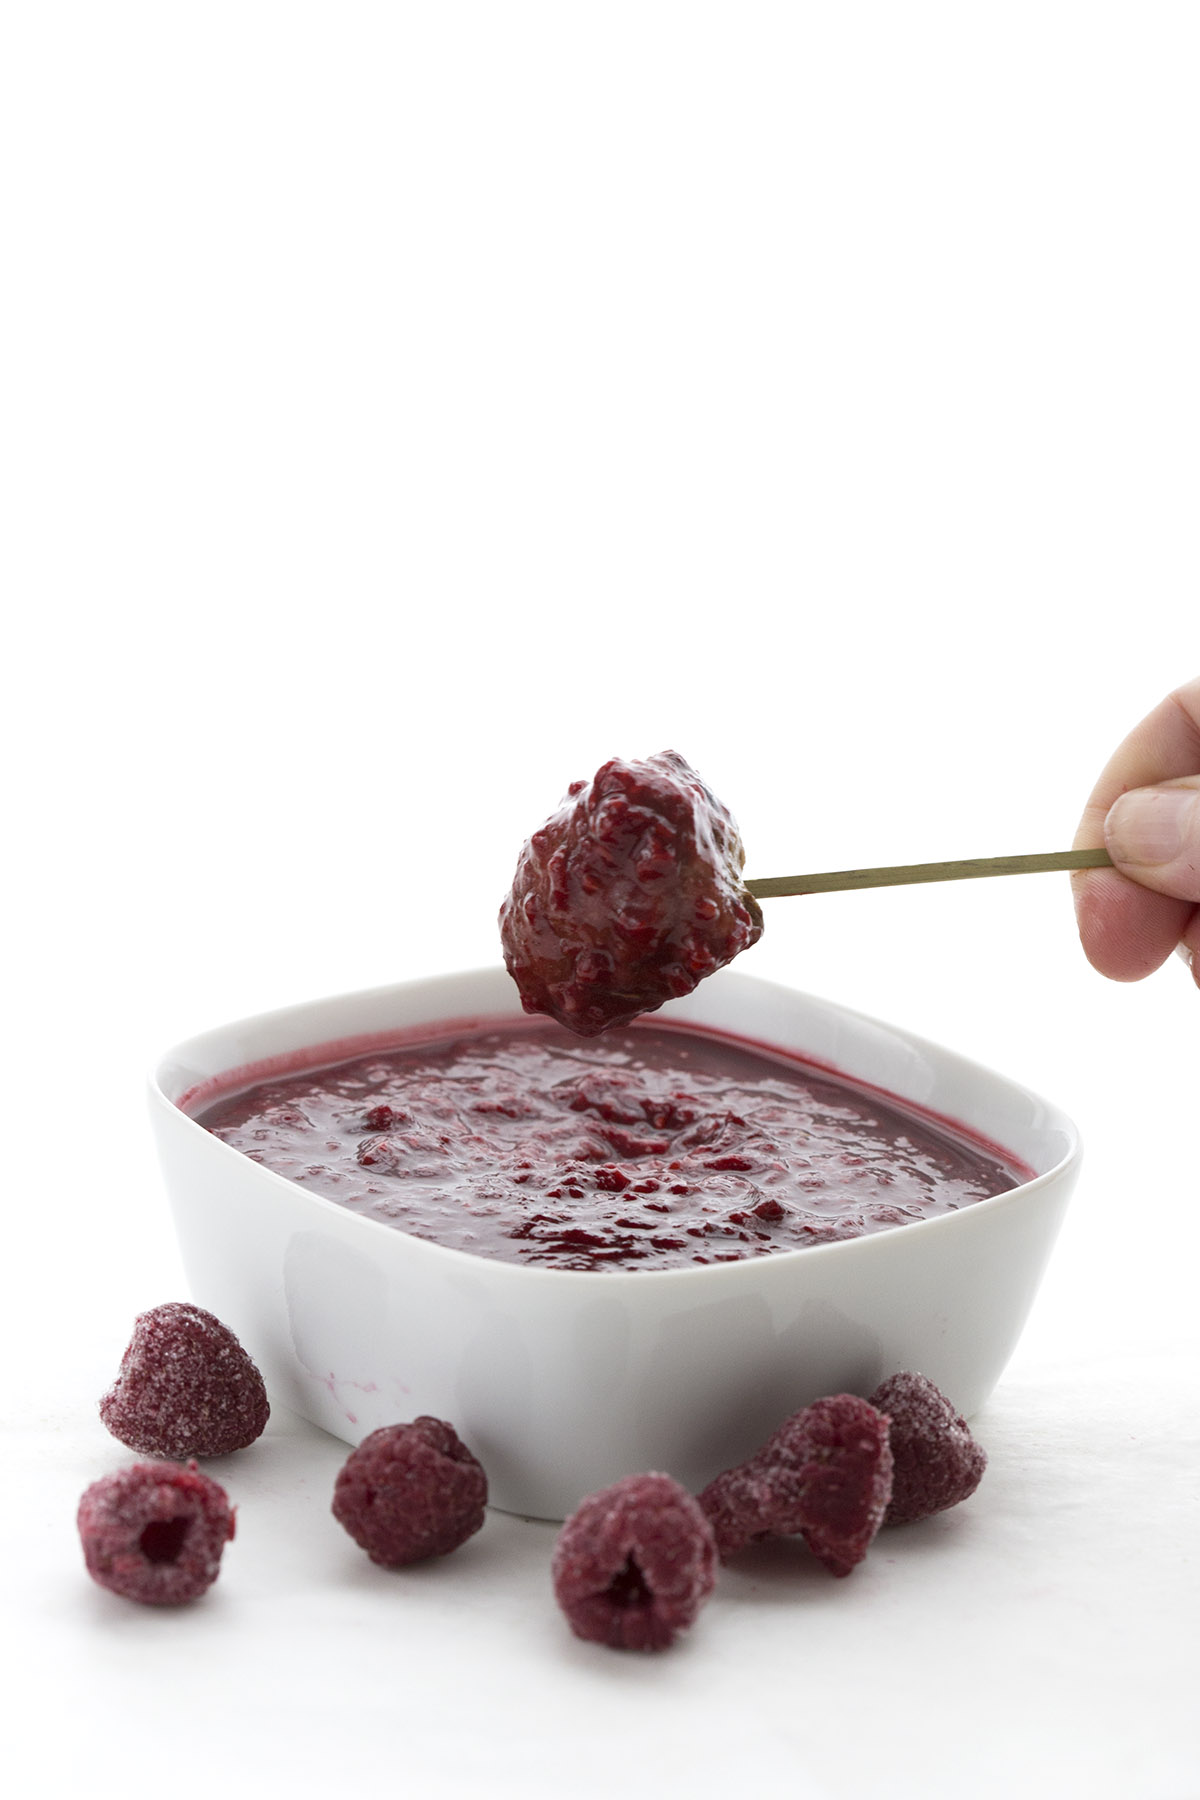 Hand dipping Slow Cooker Meatballs into Raspberry Chipotle Dipping Sauce